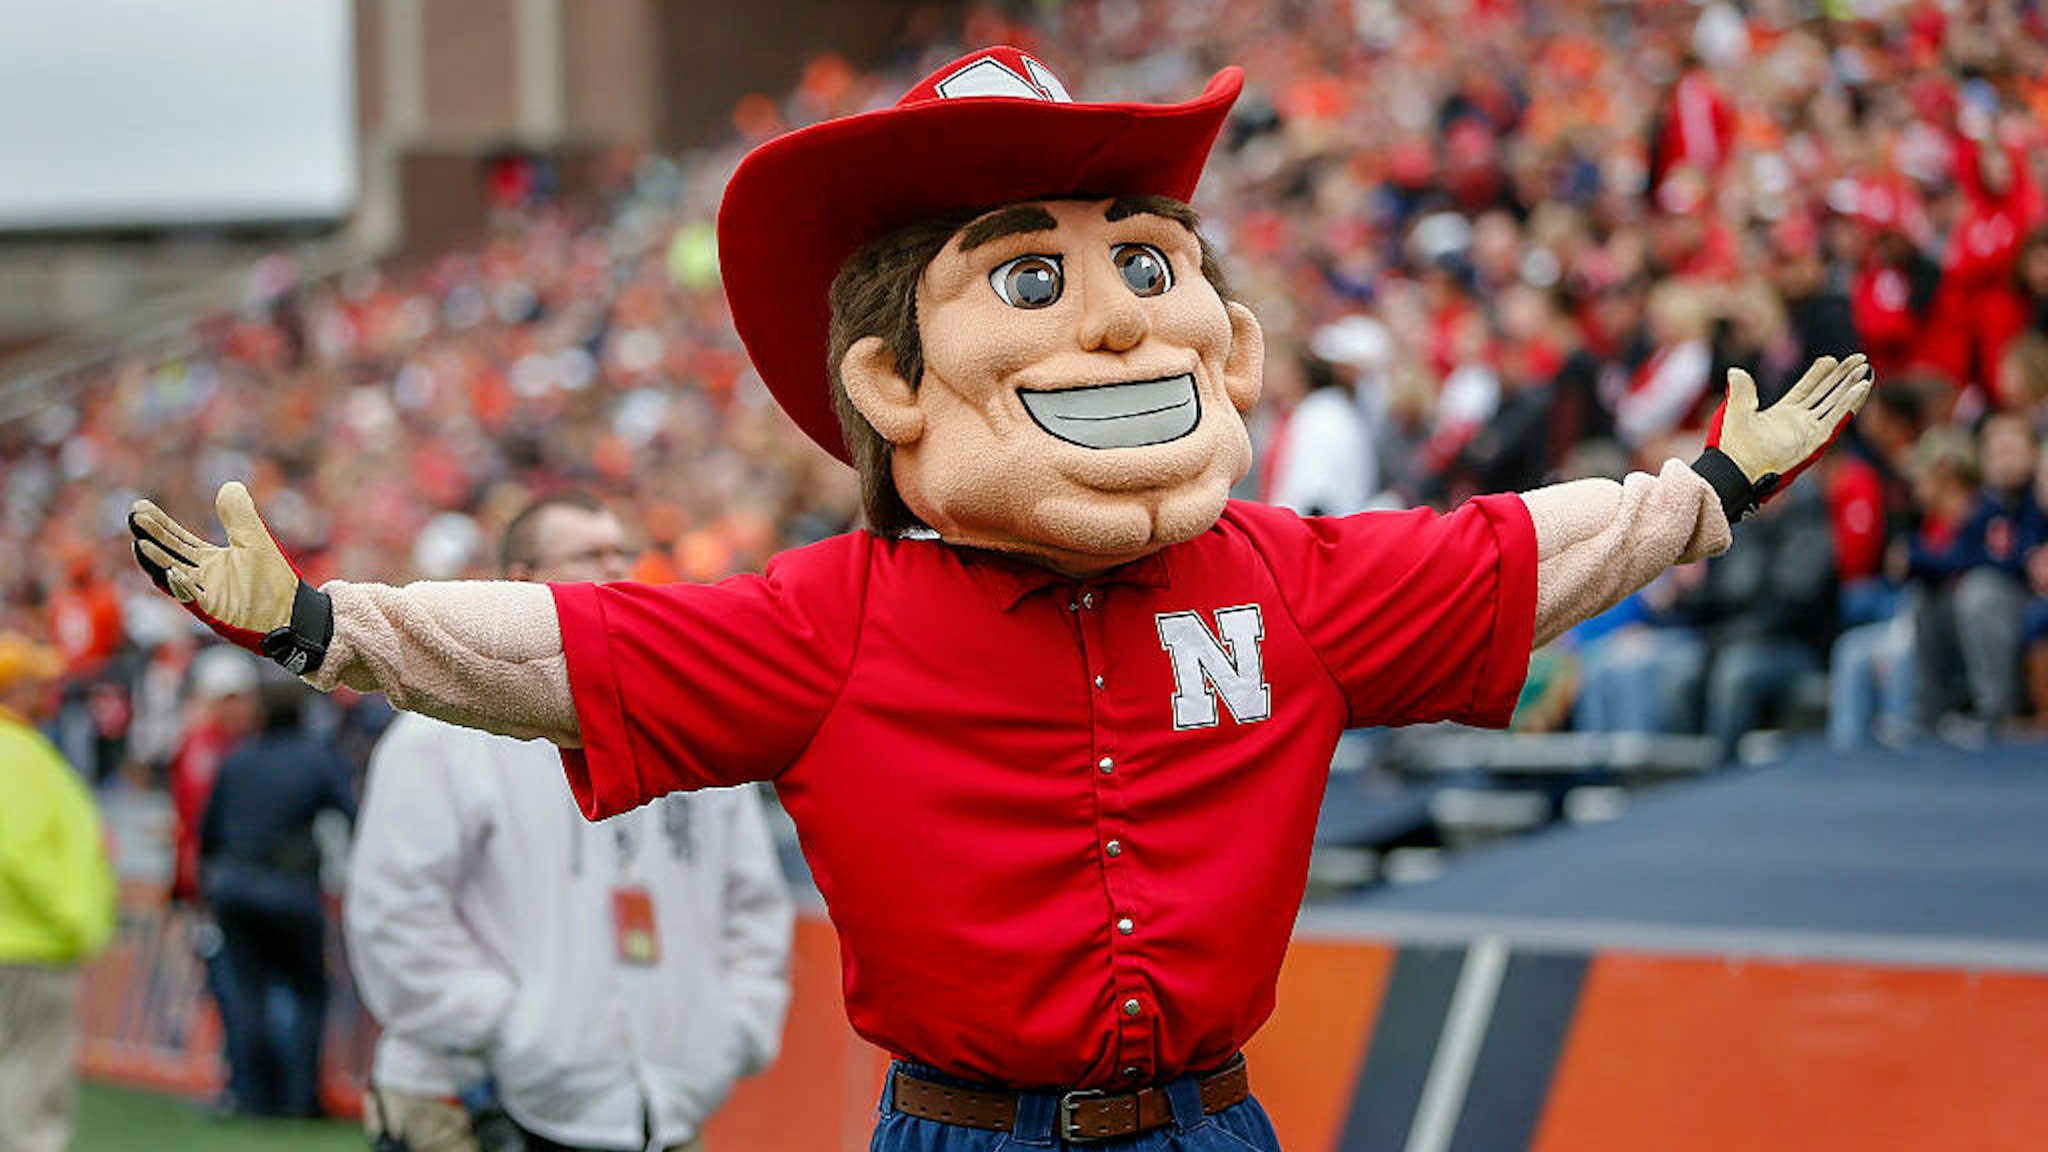 CHAMPAIGN, IL - OCTOBER 3: Nebraska Cornhuskers mascot Herbie Husker is seen during the game against the Illinois Fighting Illini at Memorial Stadium on October 3, 2015 in Champaign, Illinois. Illinois defeated Nebraska 14-13. (Photo by Michael Hickey/Getty Images)